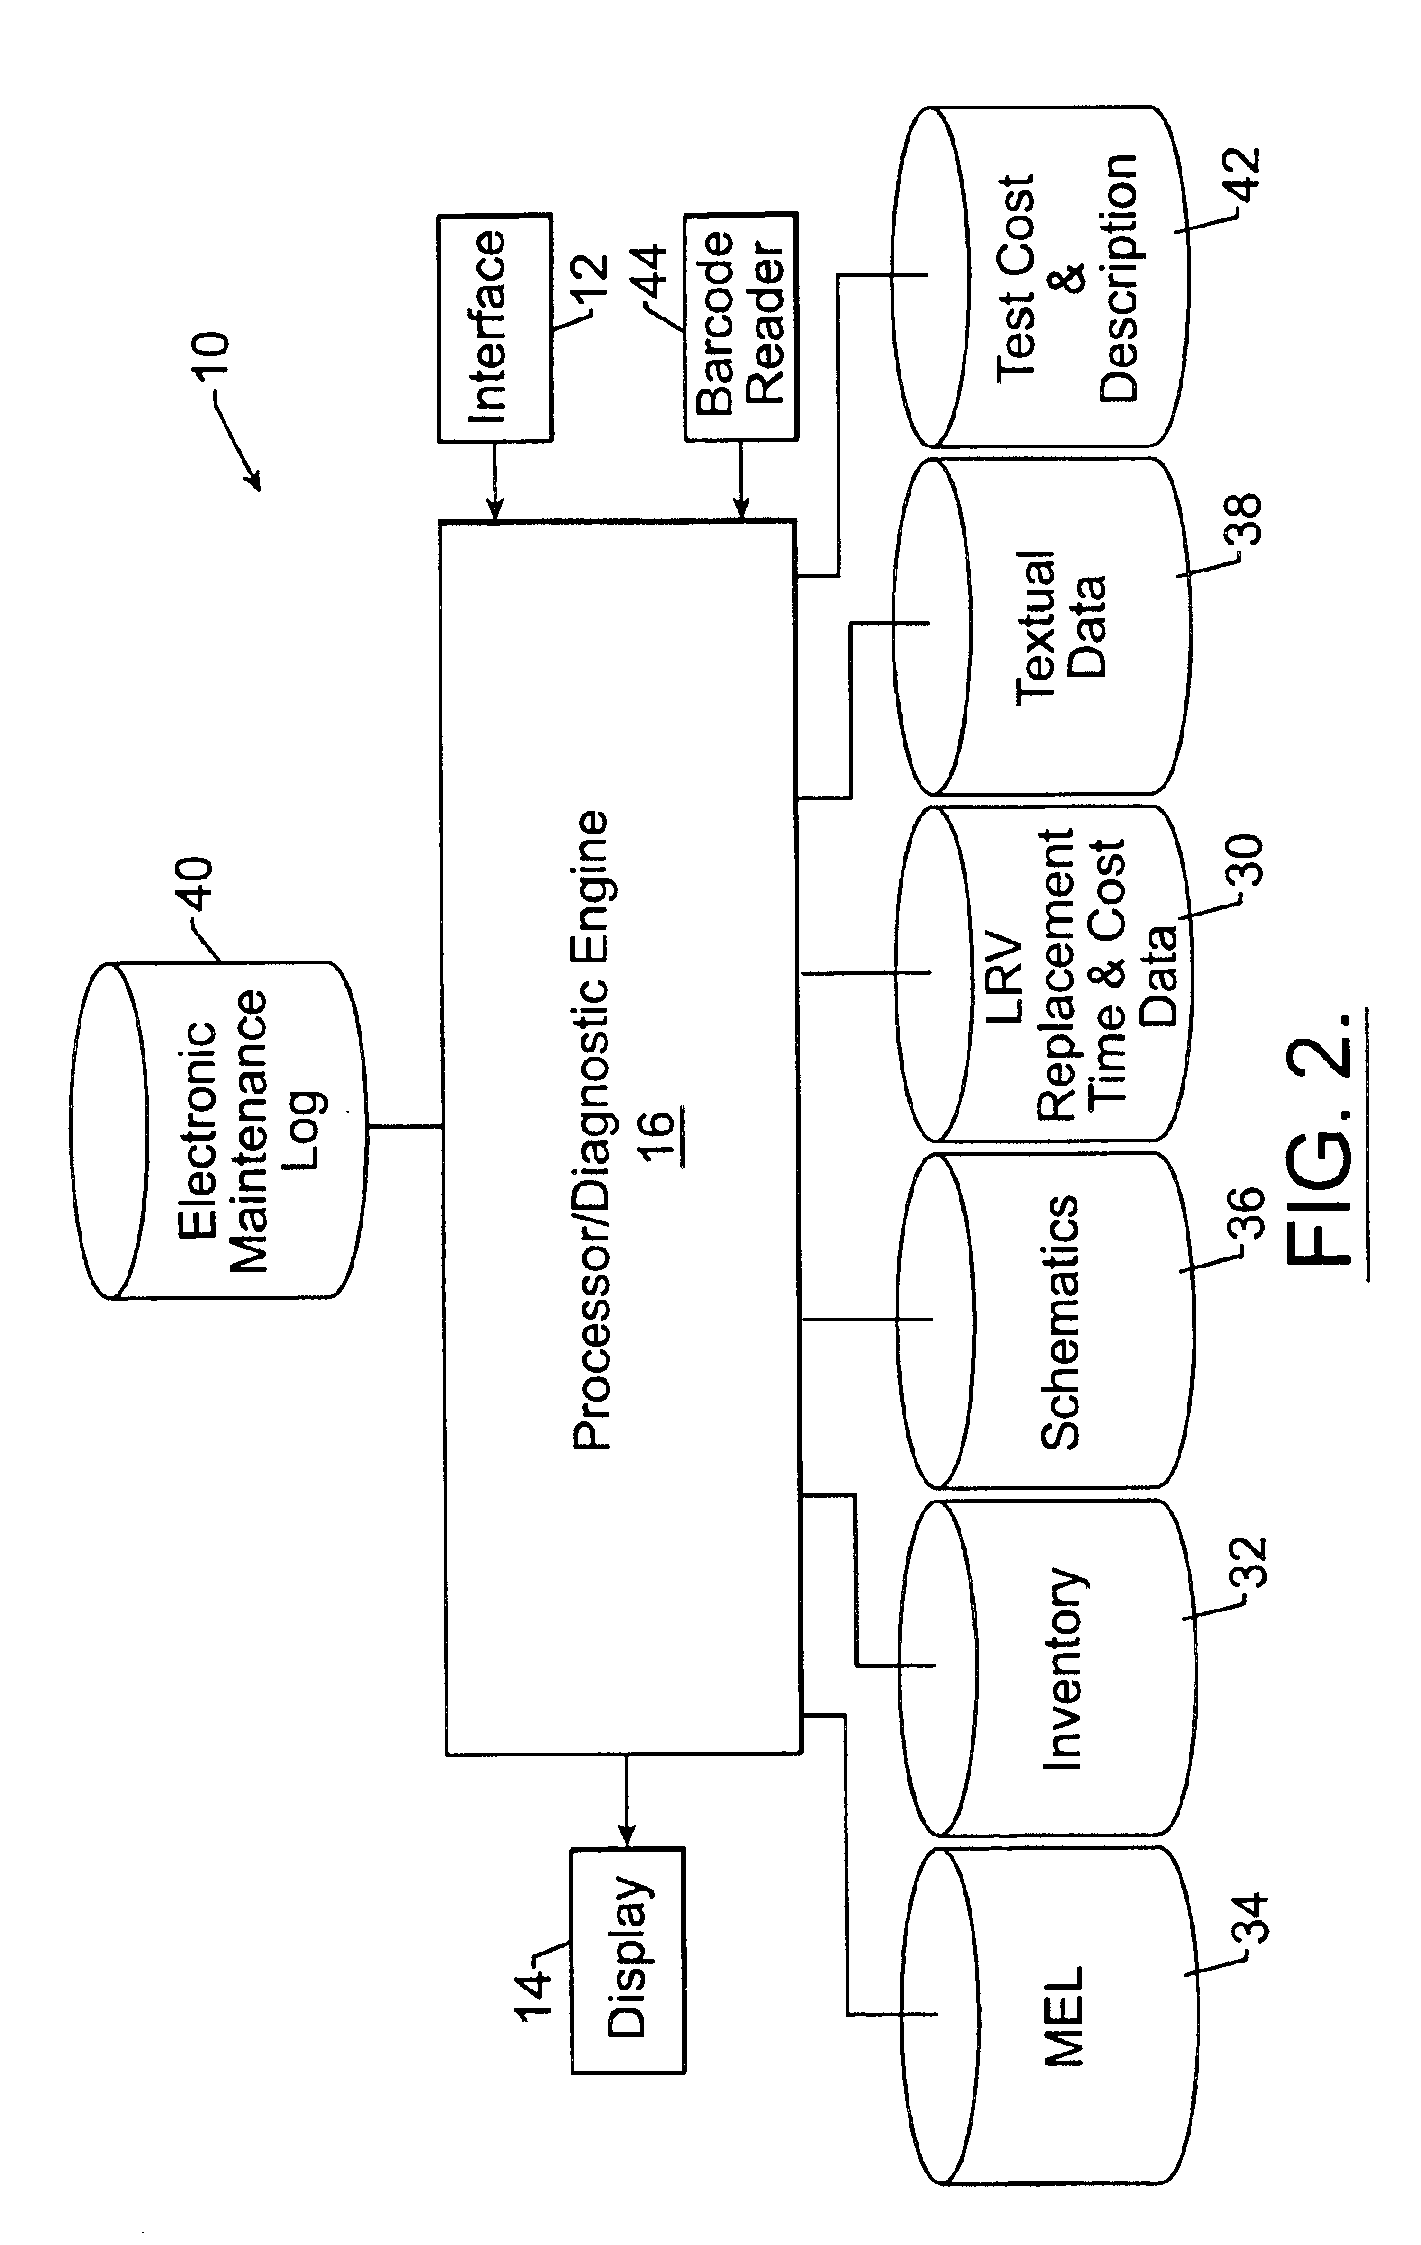 Diagnostic system and method